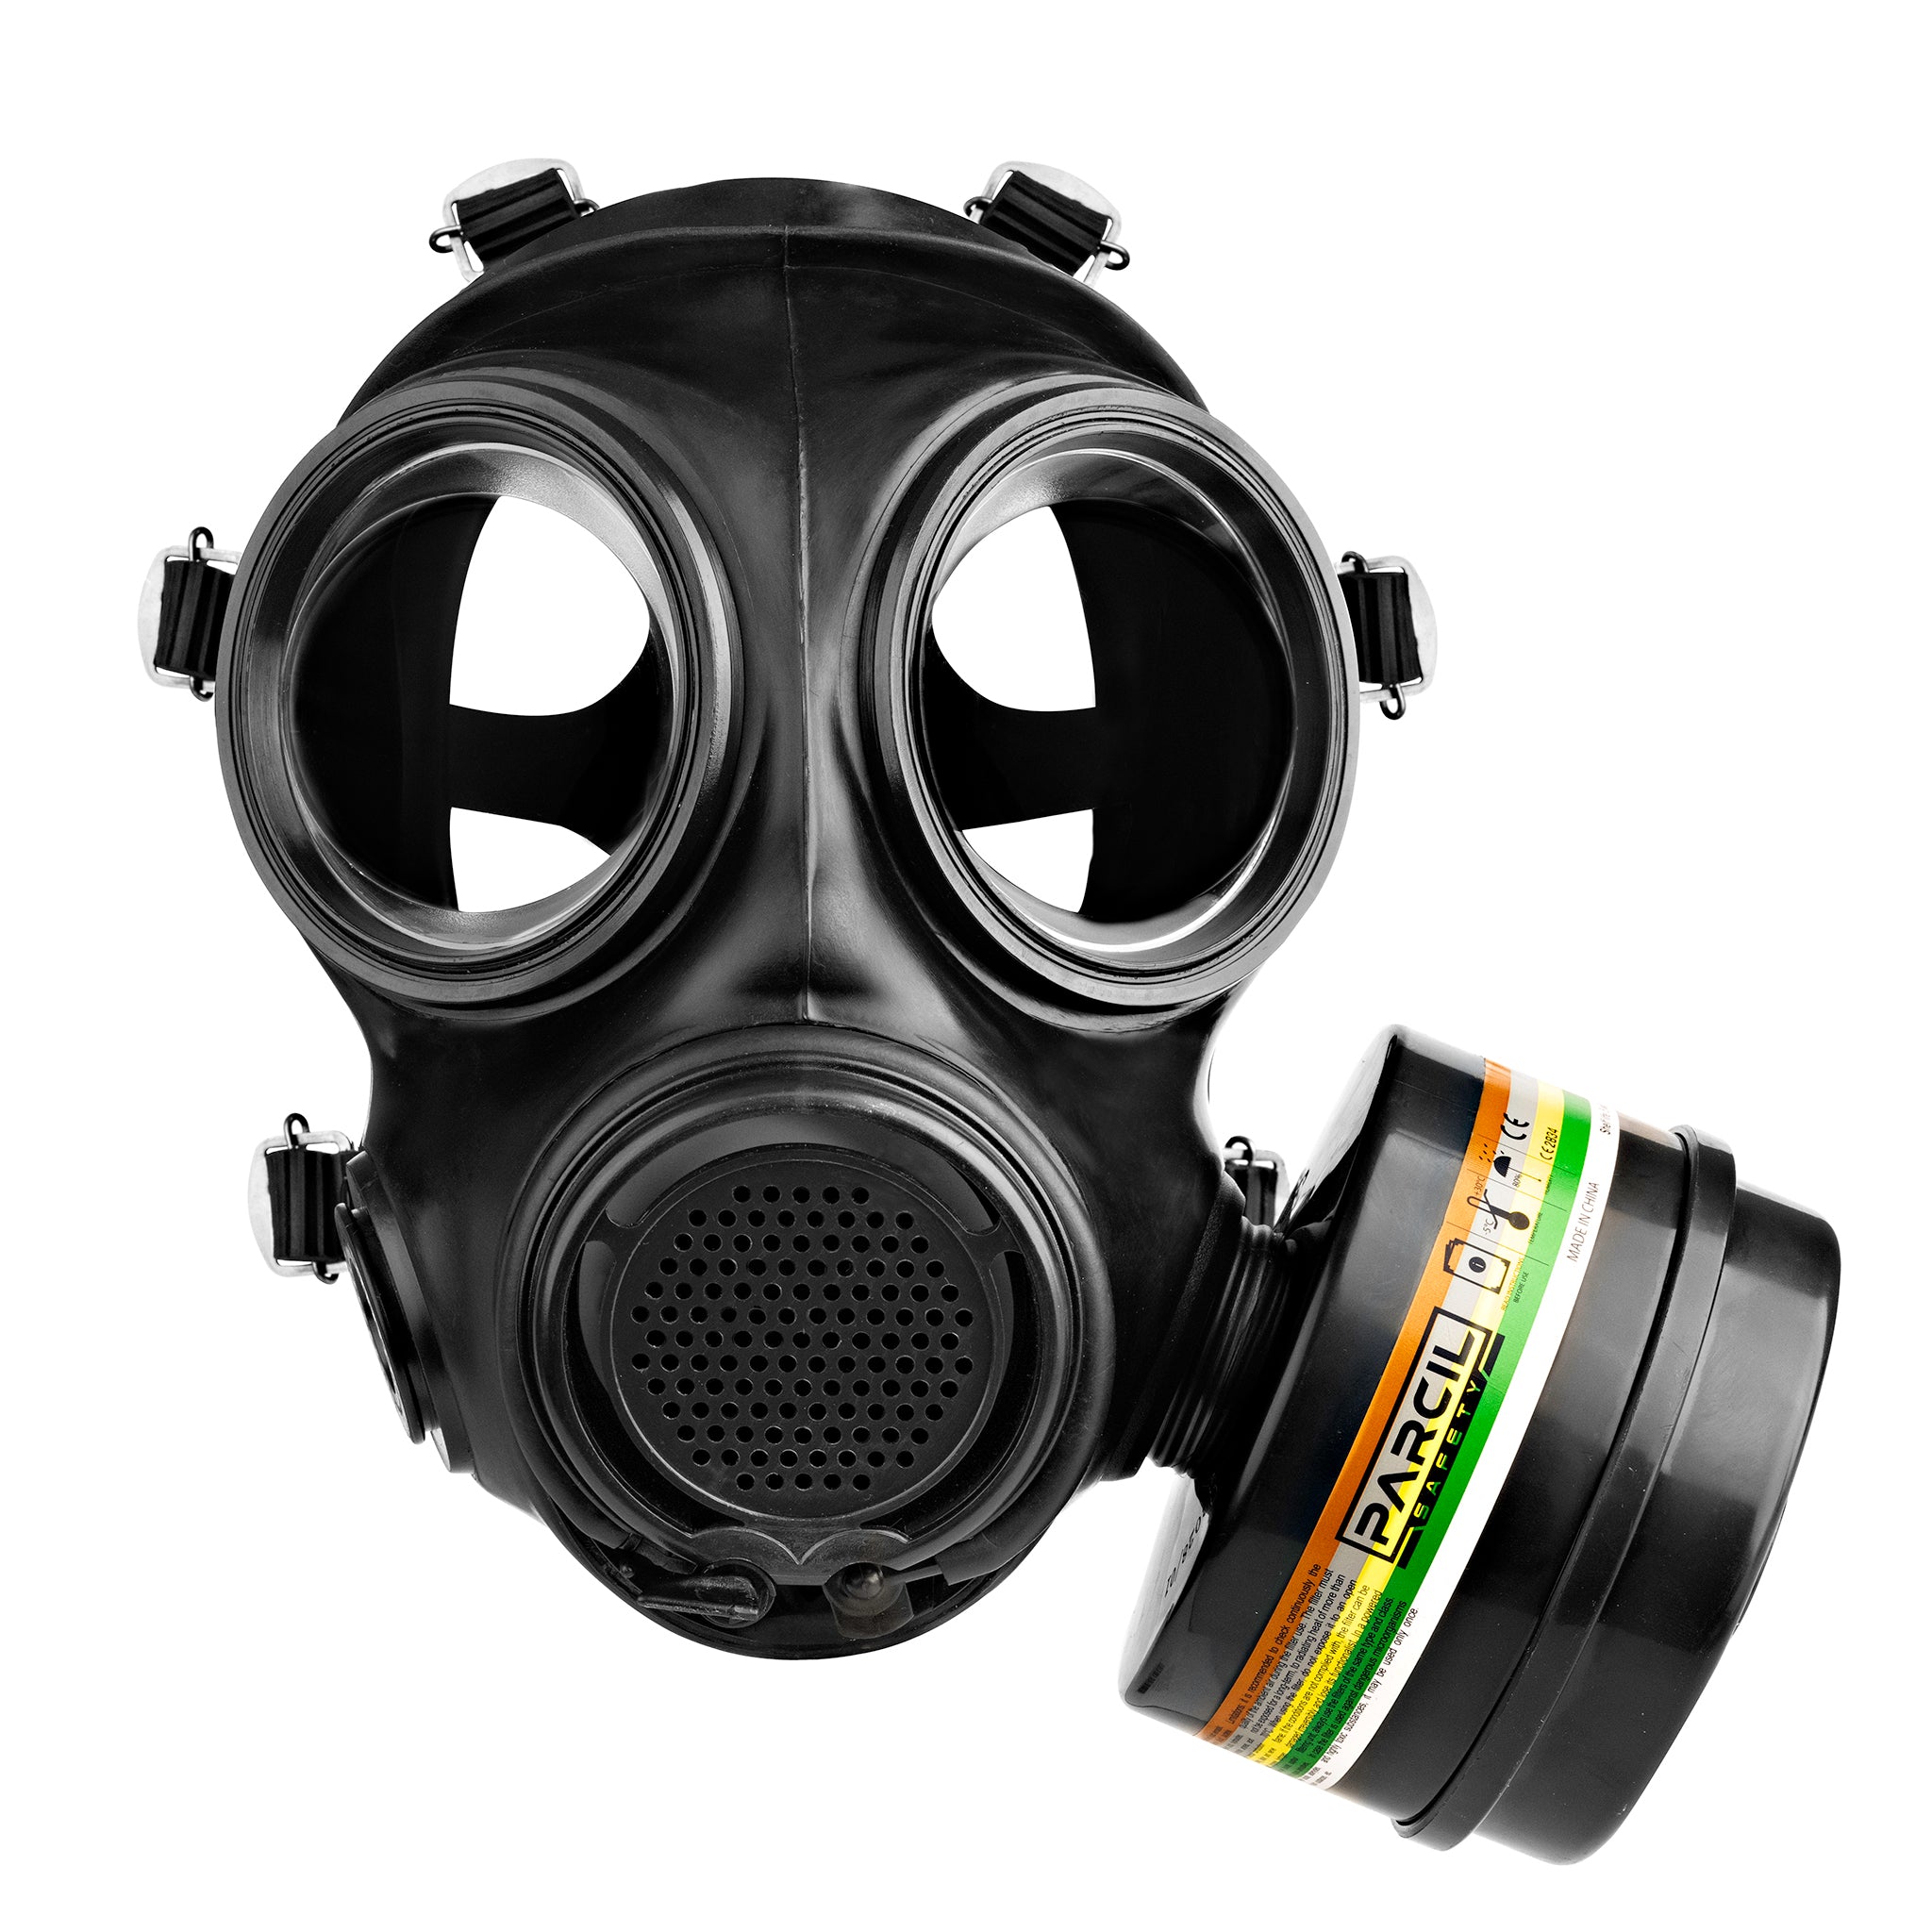 IIR-100 Recon Gas Mask - Full Face Butyl Rubber Gas Mask with N-B-1 40 –  Parcil Safety